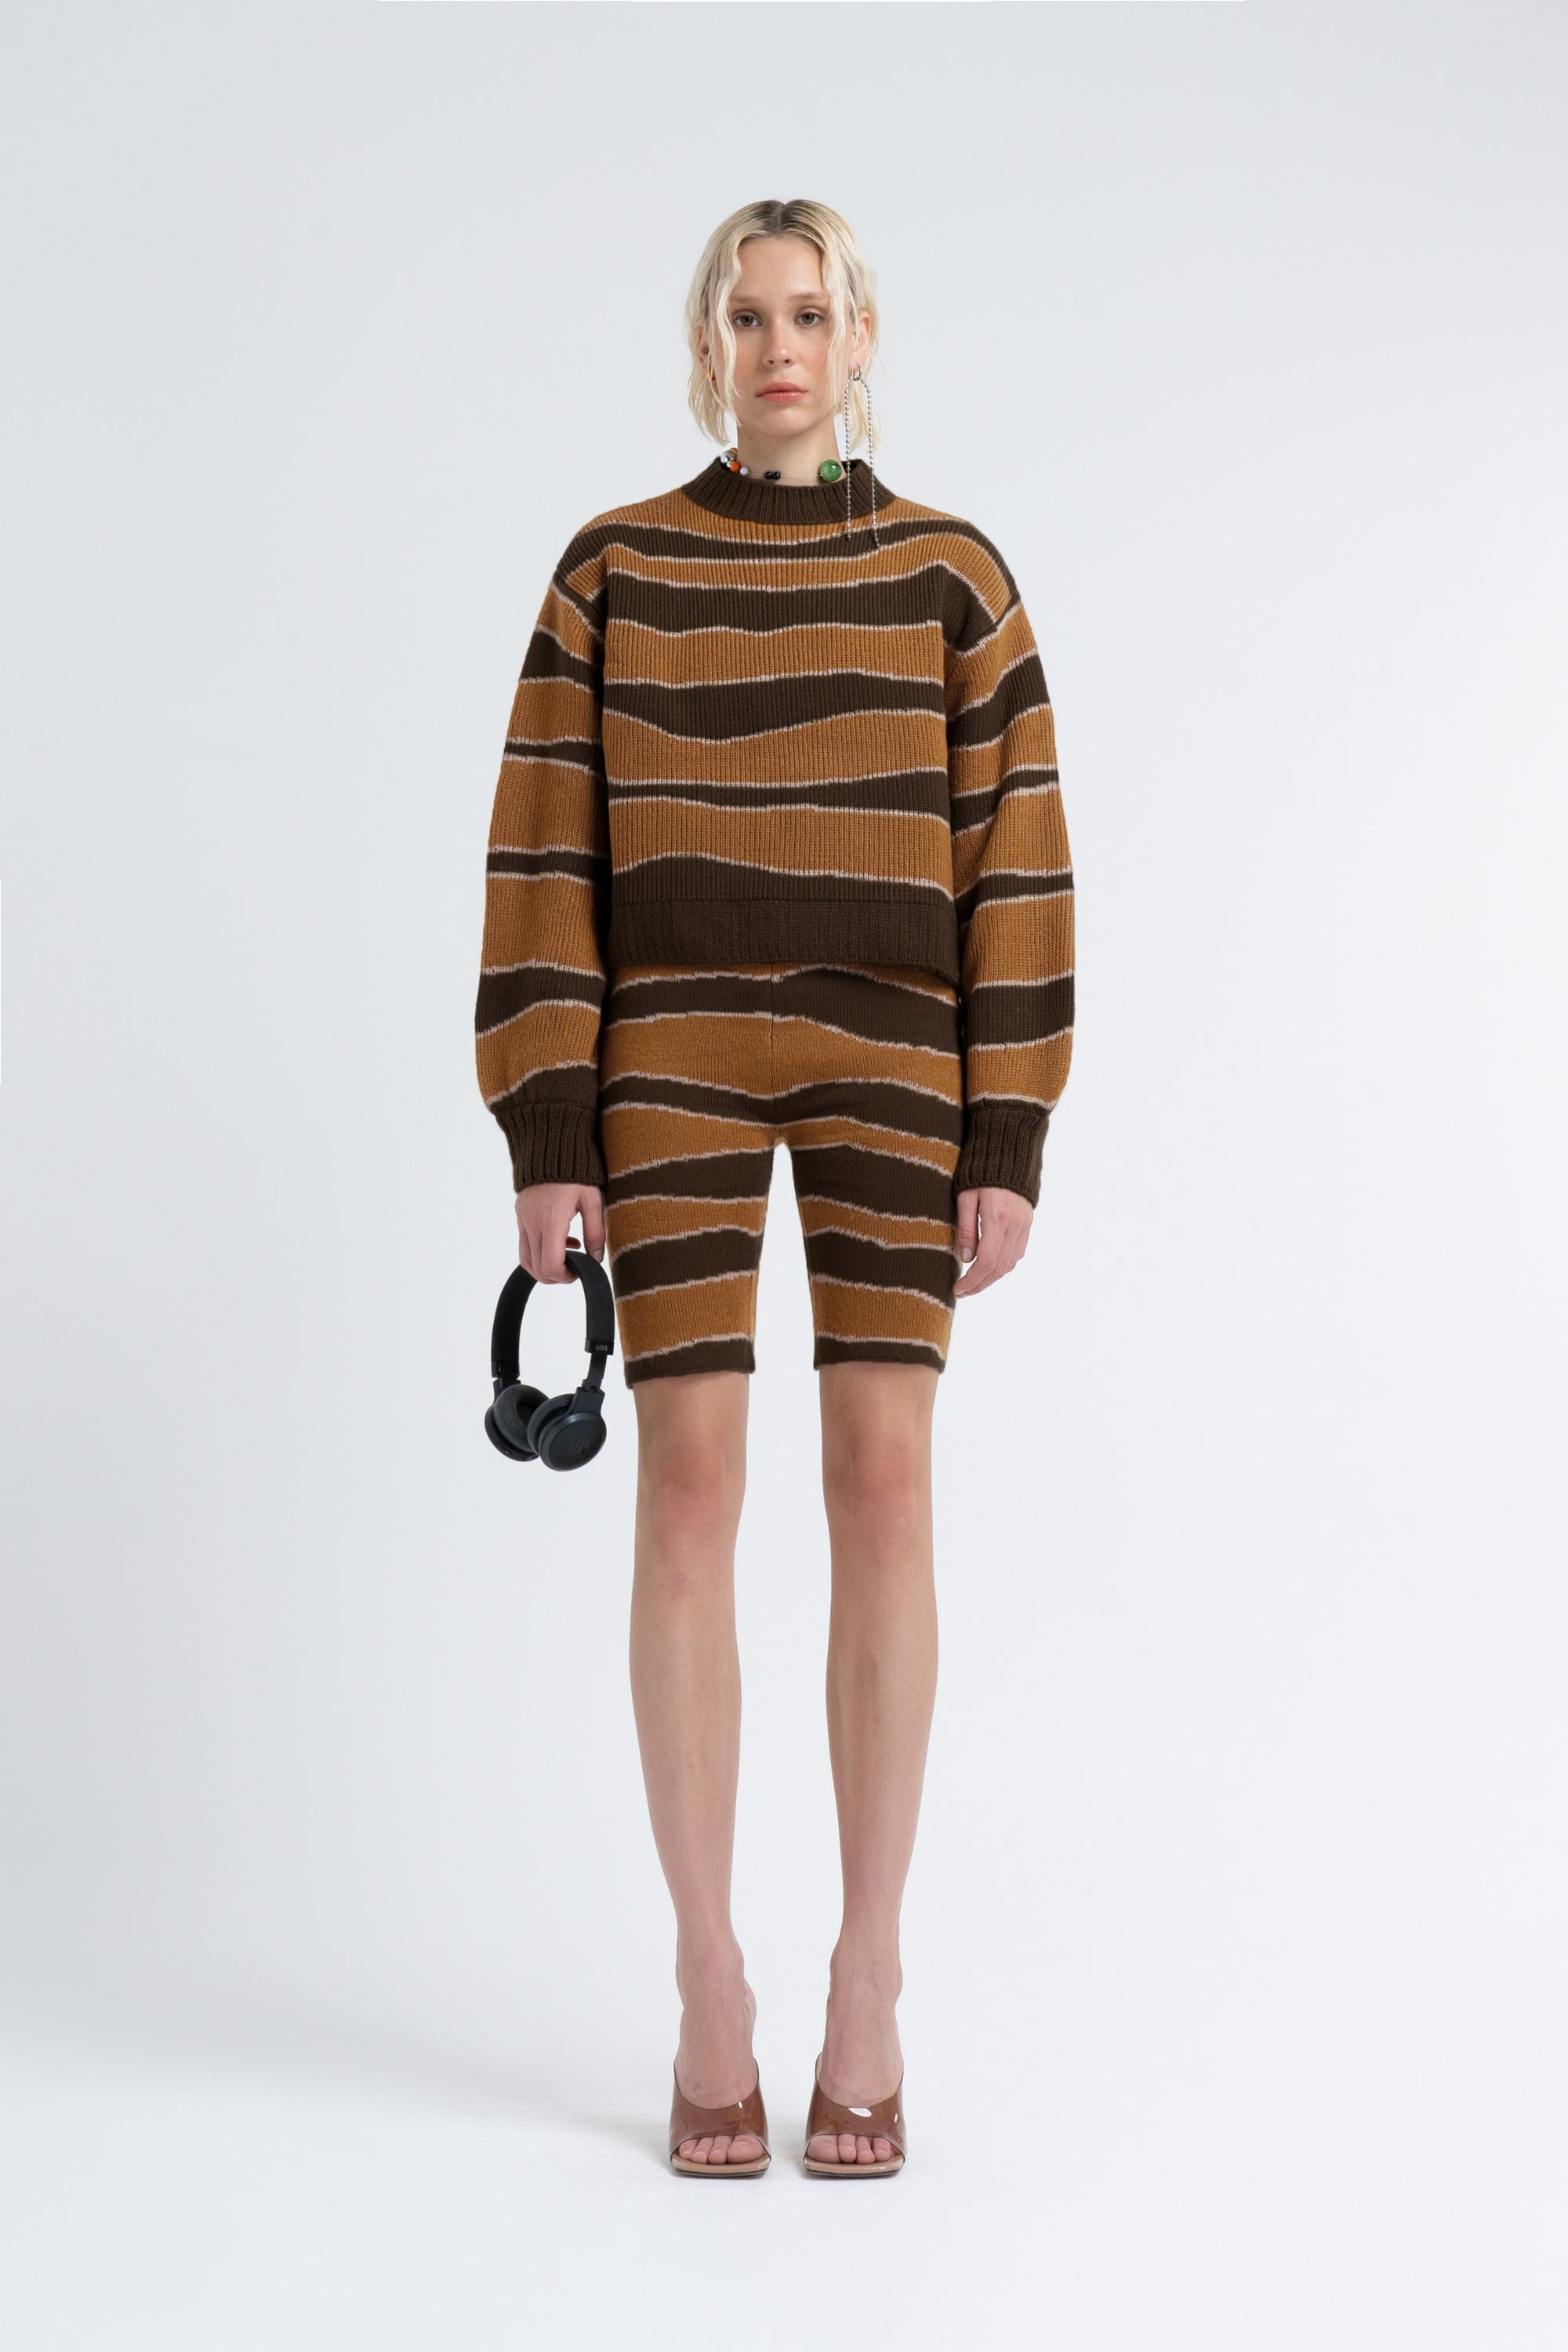 Arthur Apparel Brown Kelp Oversized Sweater with Dropped Shoulder in Acrylic Jacquard Knit